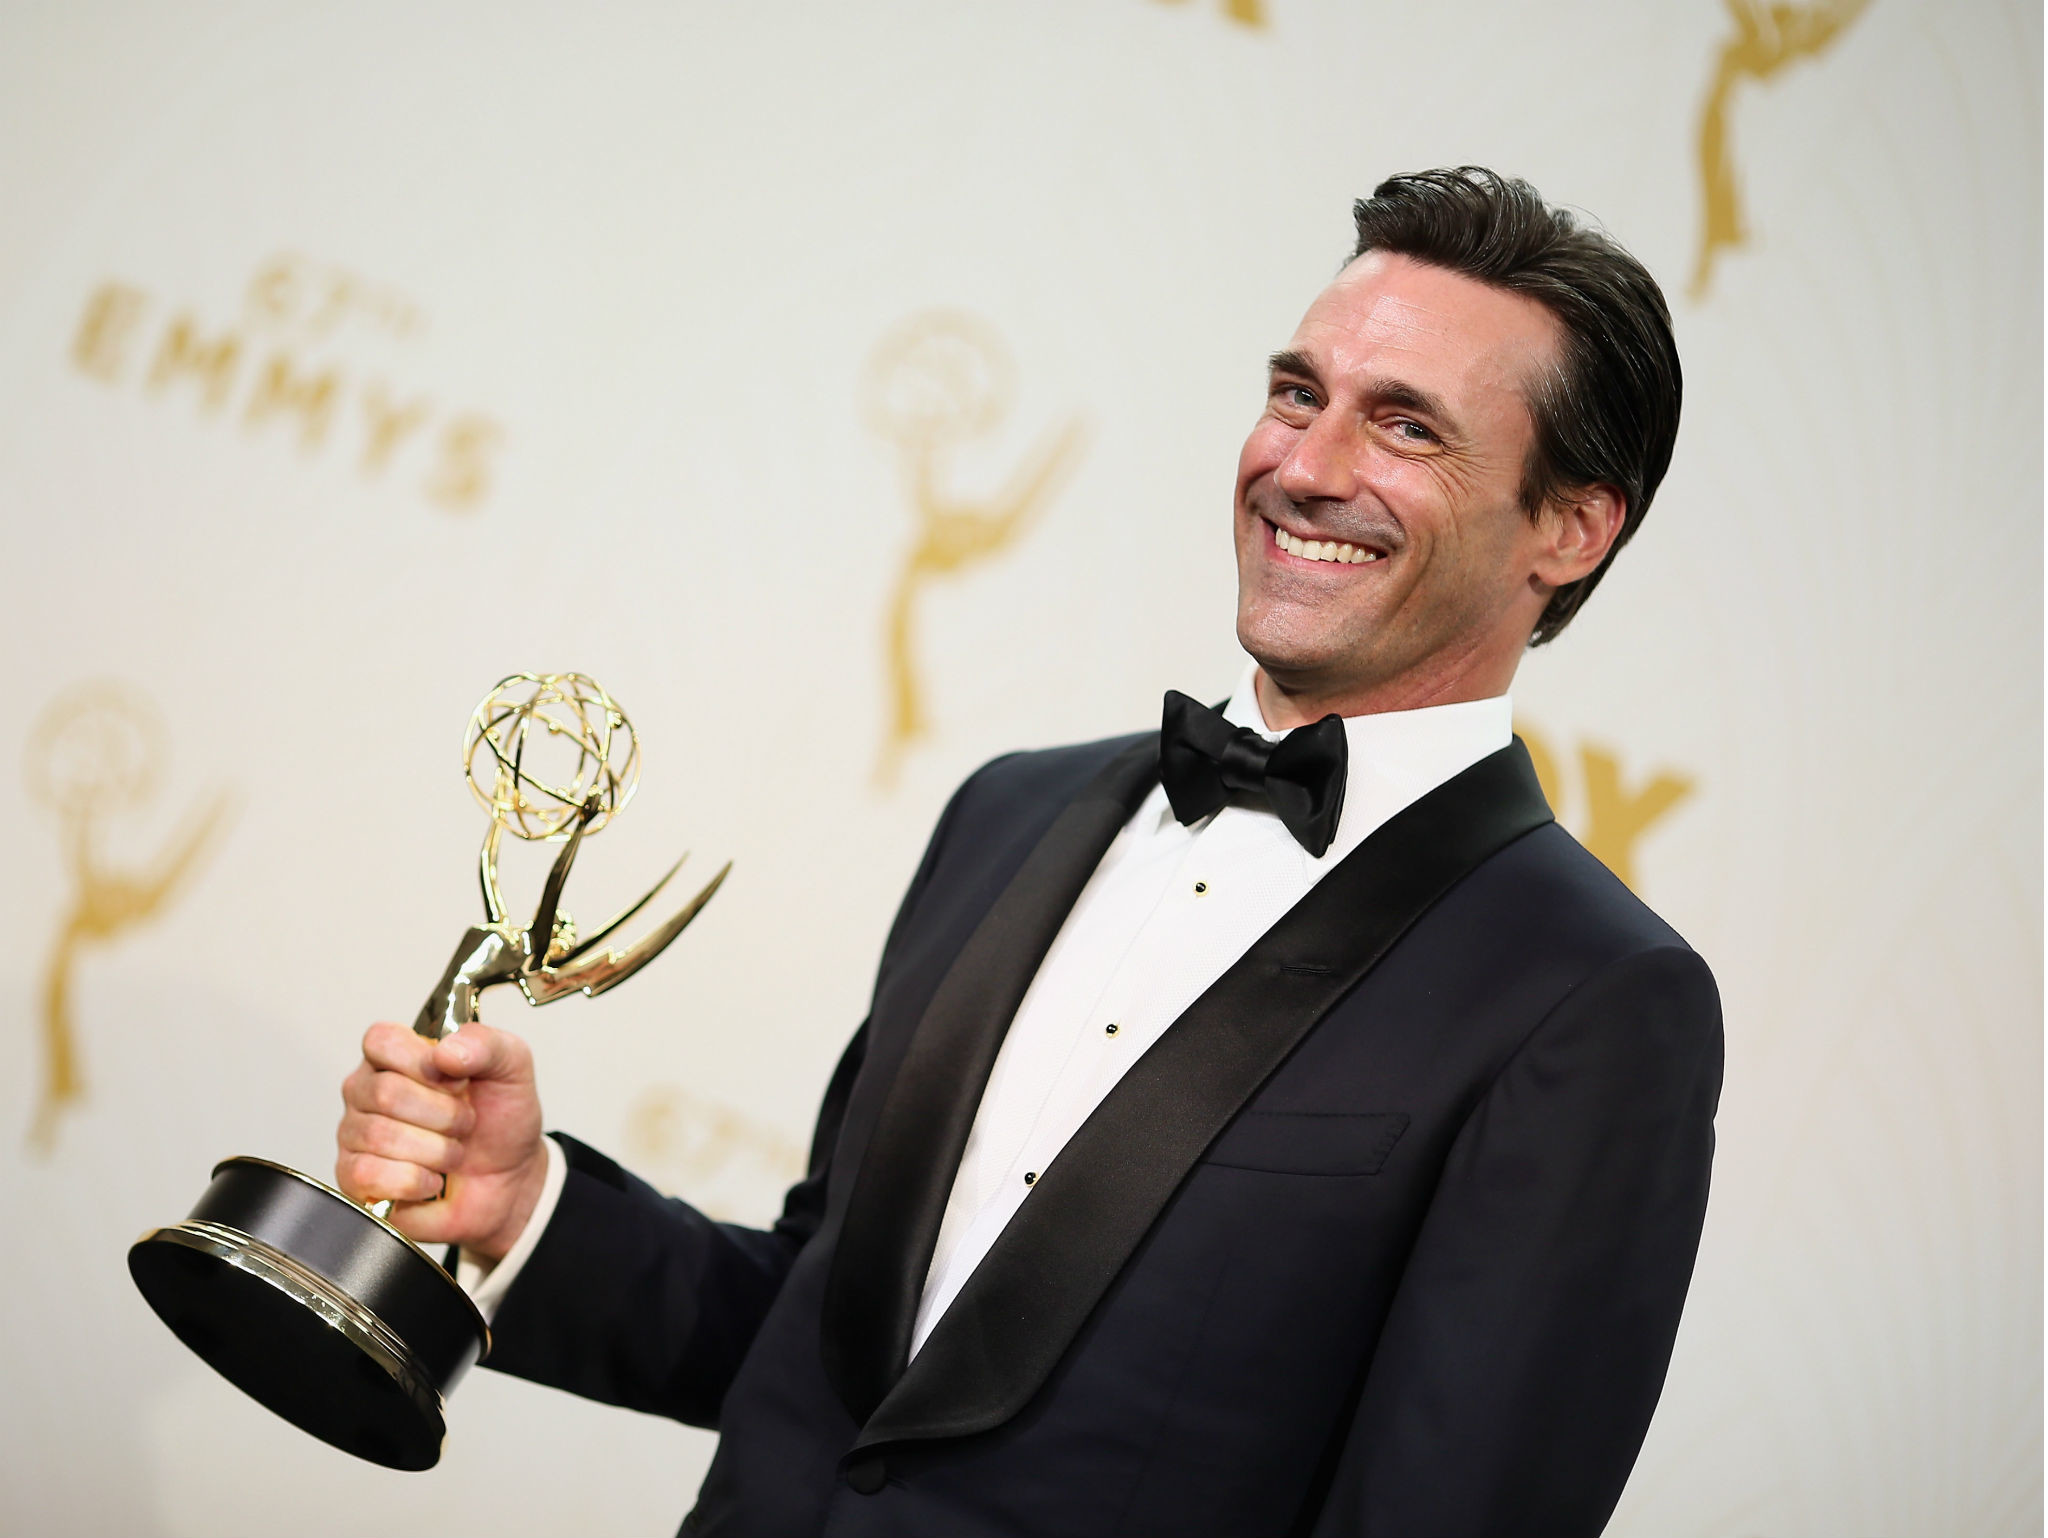 2048x1538 Emmys 2015: Jon Hamm finally wins best actor for Mad Men, dedicates award  to those who took him in after his mother died | The Independent